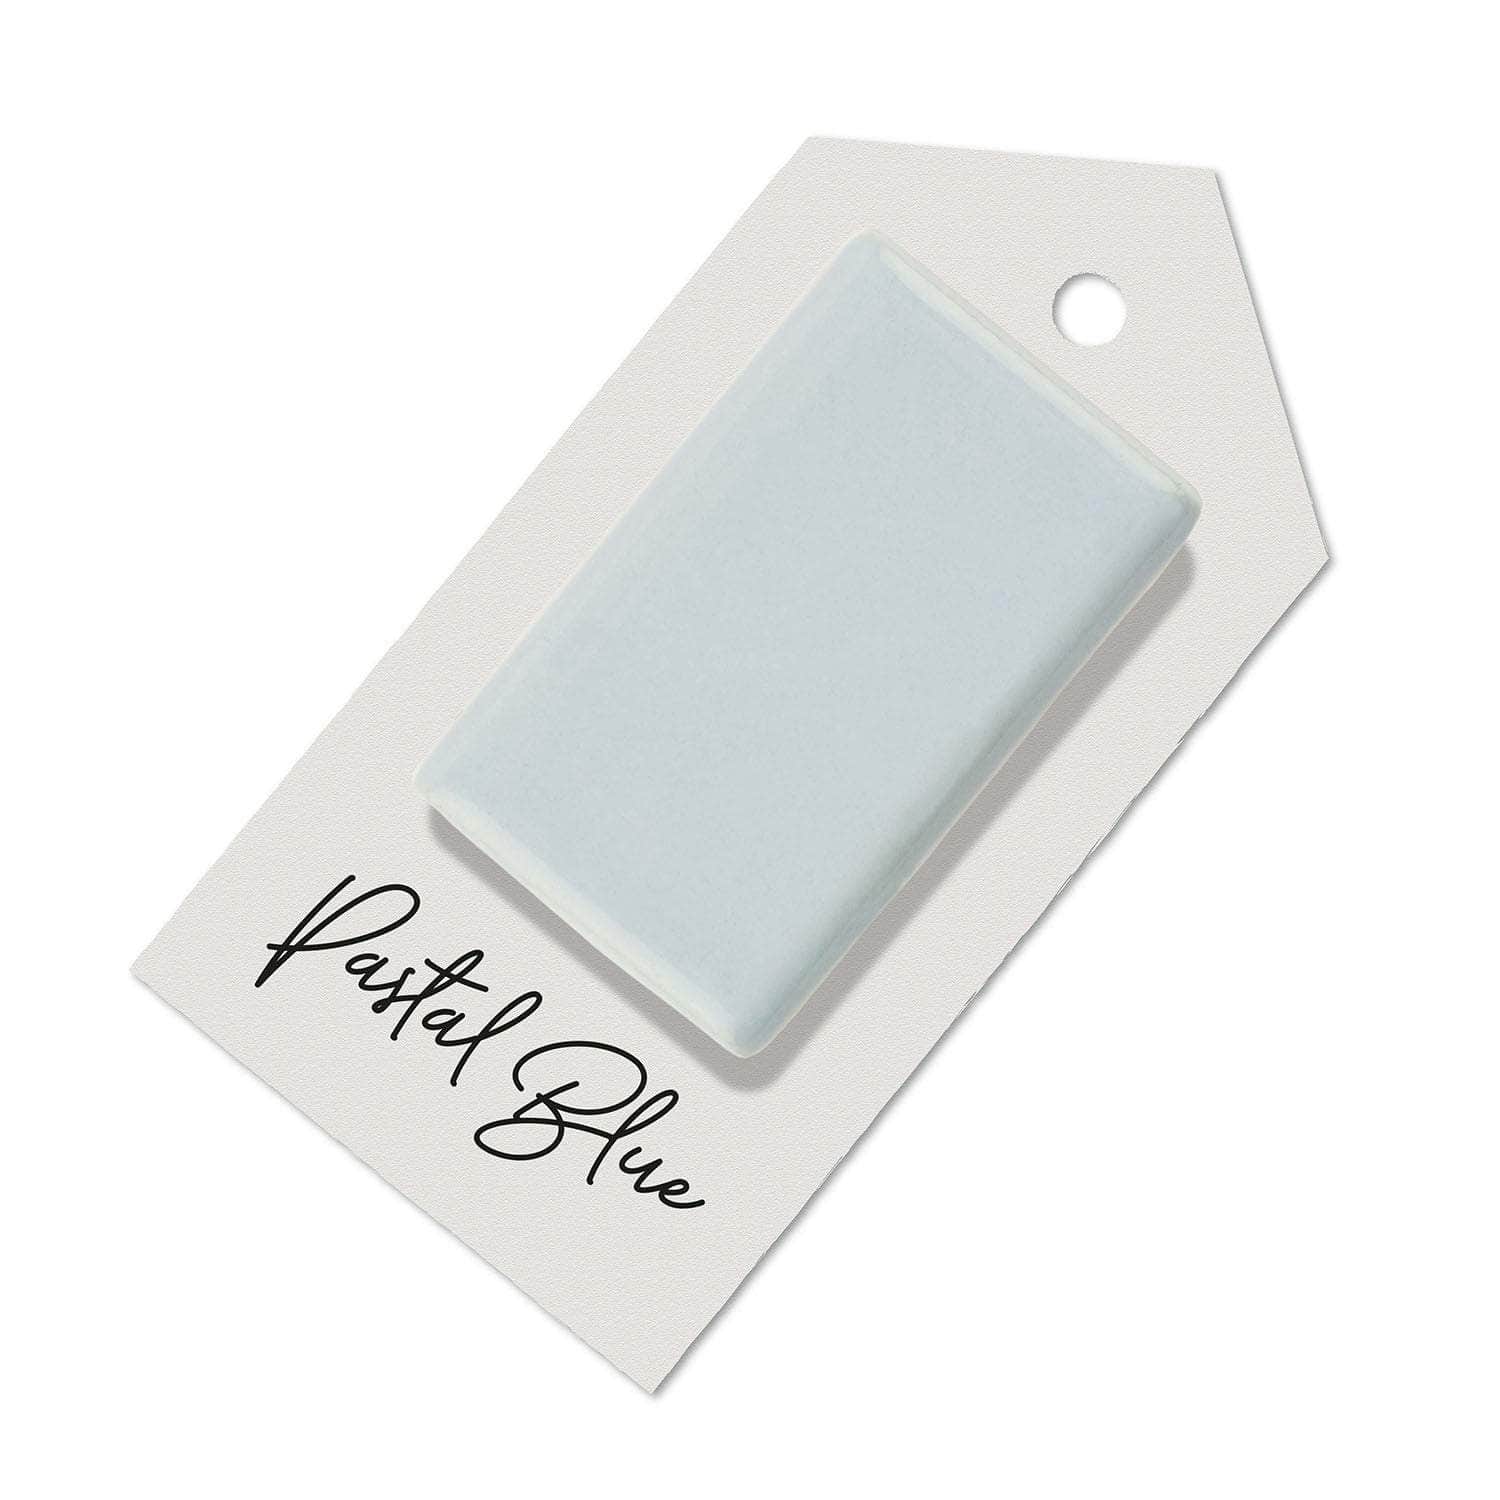 Pastal Blue sample for Aga range cooker re-enamelling & reconditioned cookers